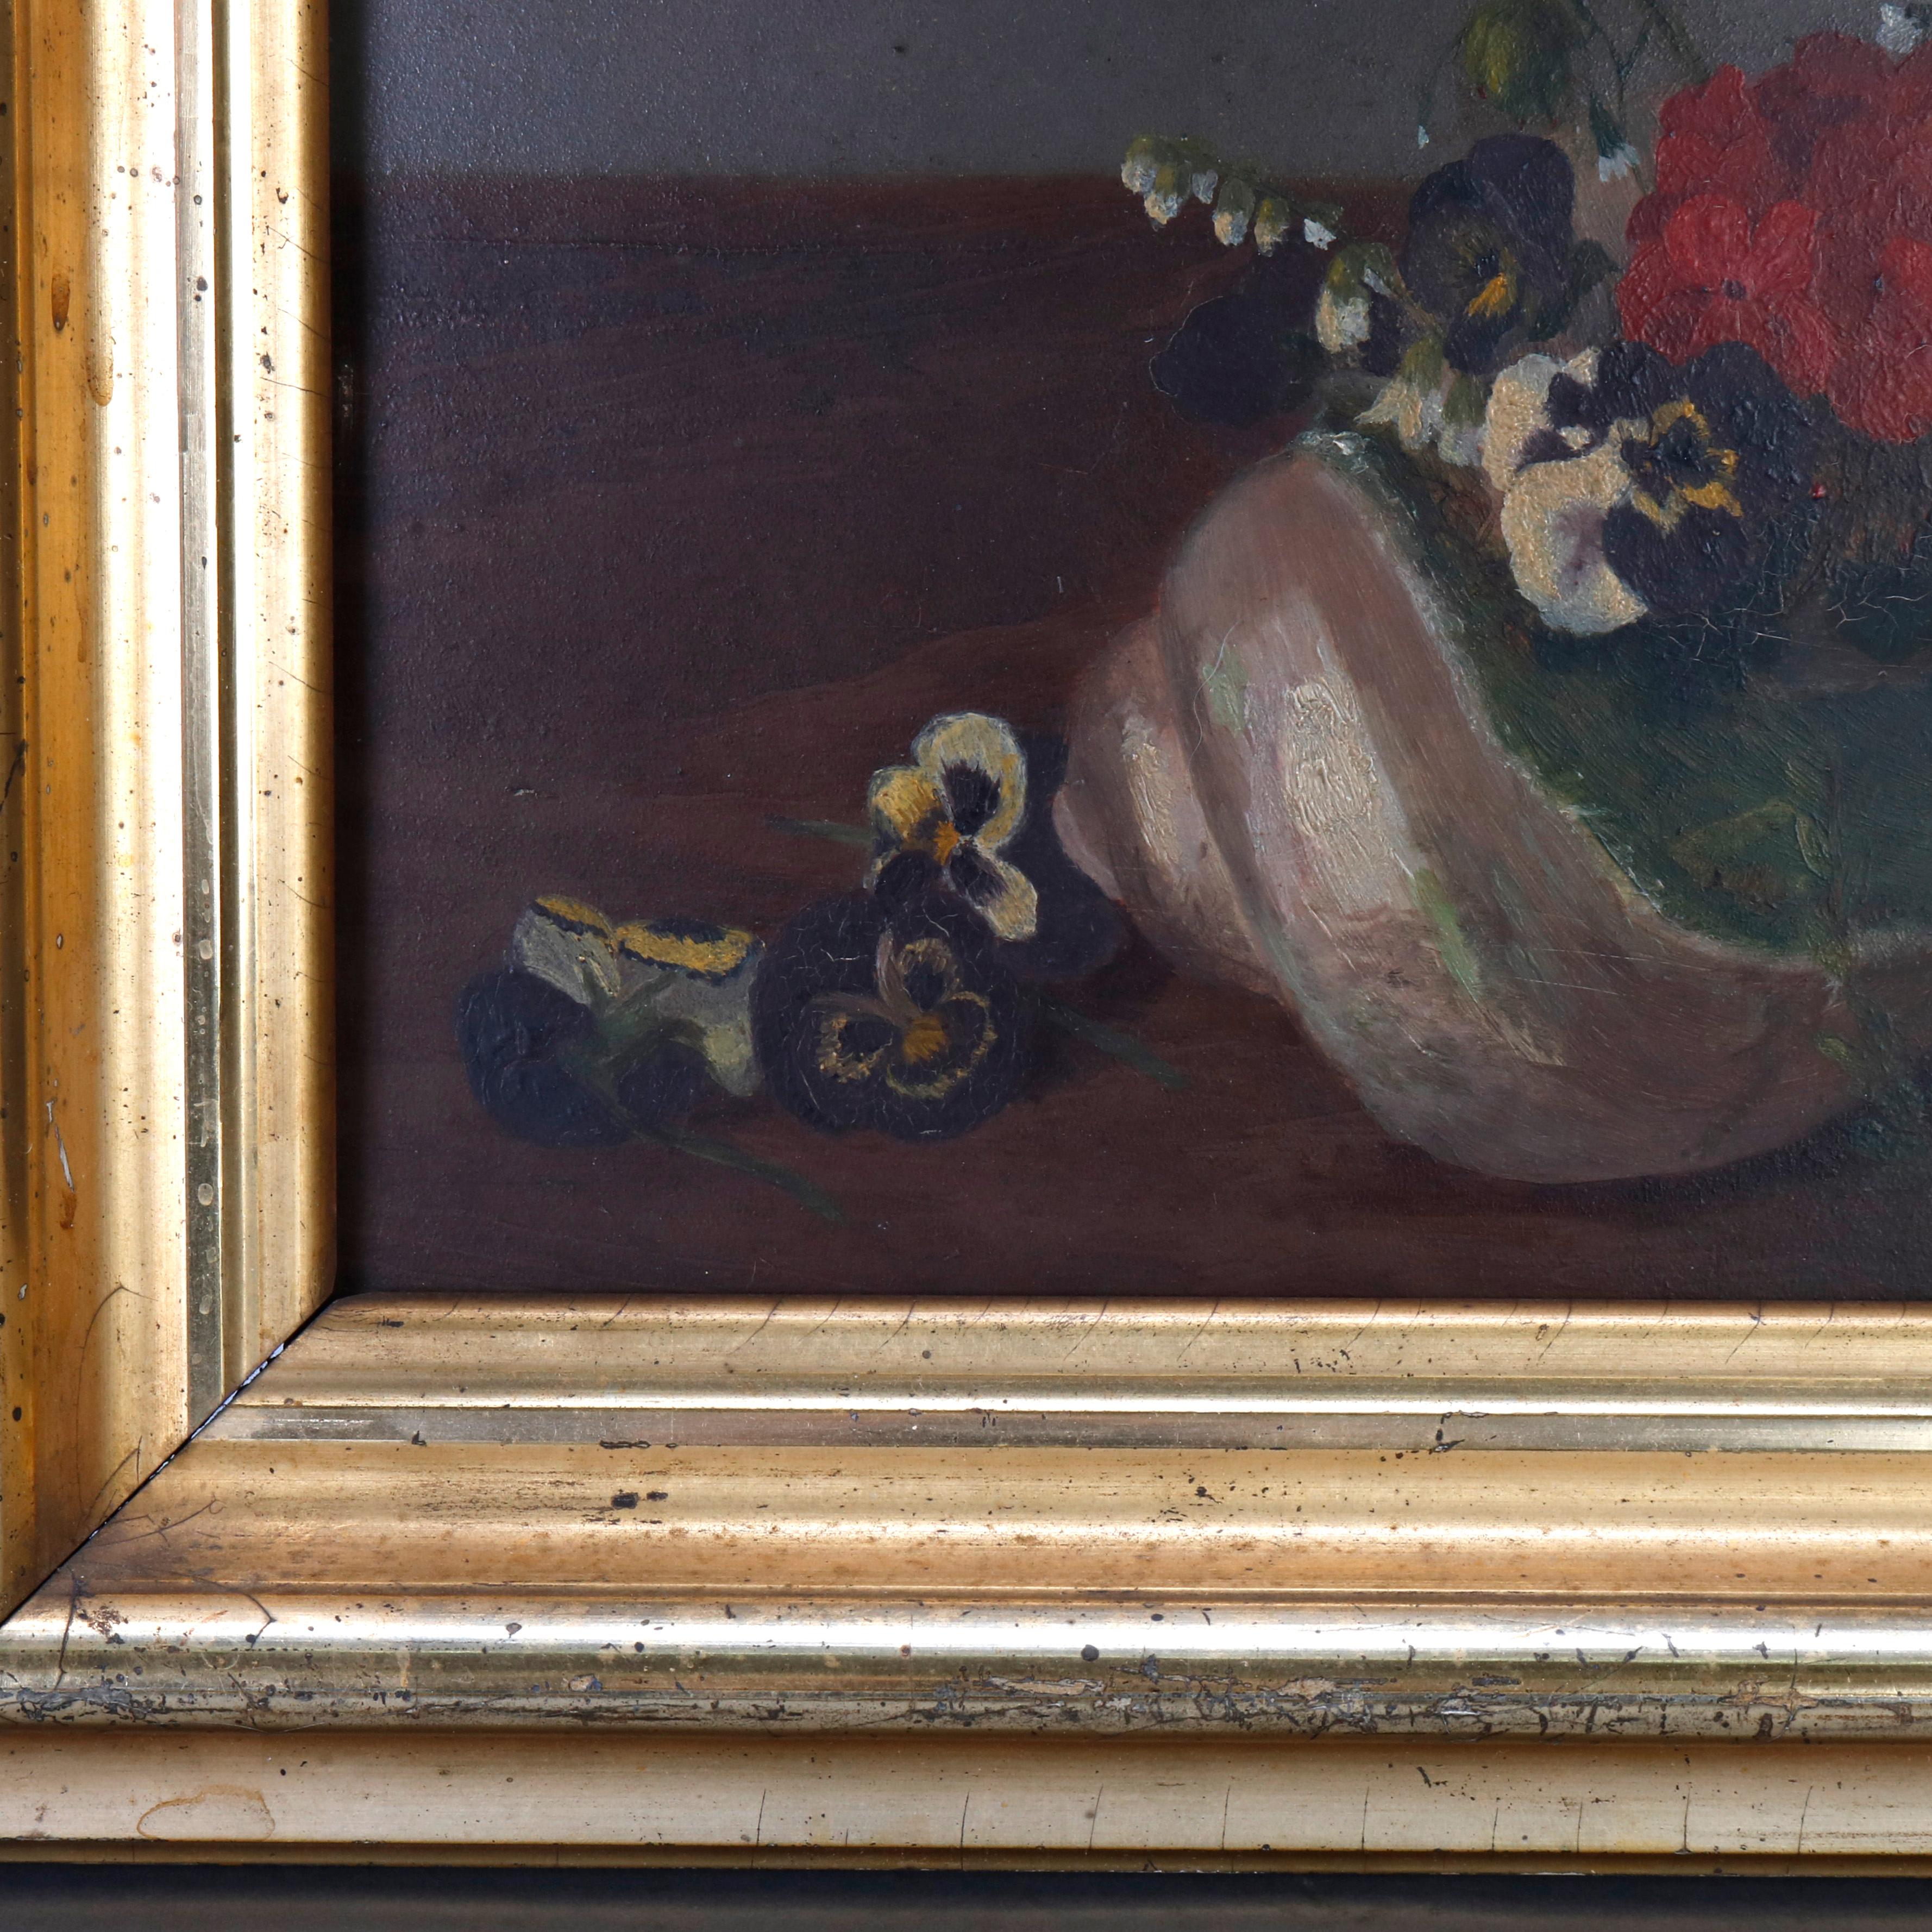 An antique painting offers oil on panel still life with flowers in seashell, artist signed lower right, seated in giltwood frame, circa 1900

Measures: 13.5